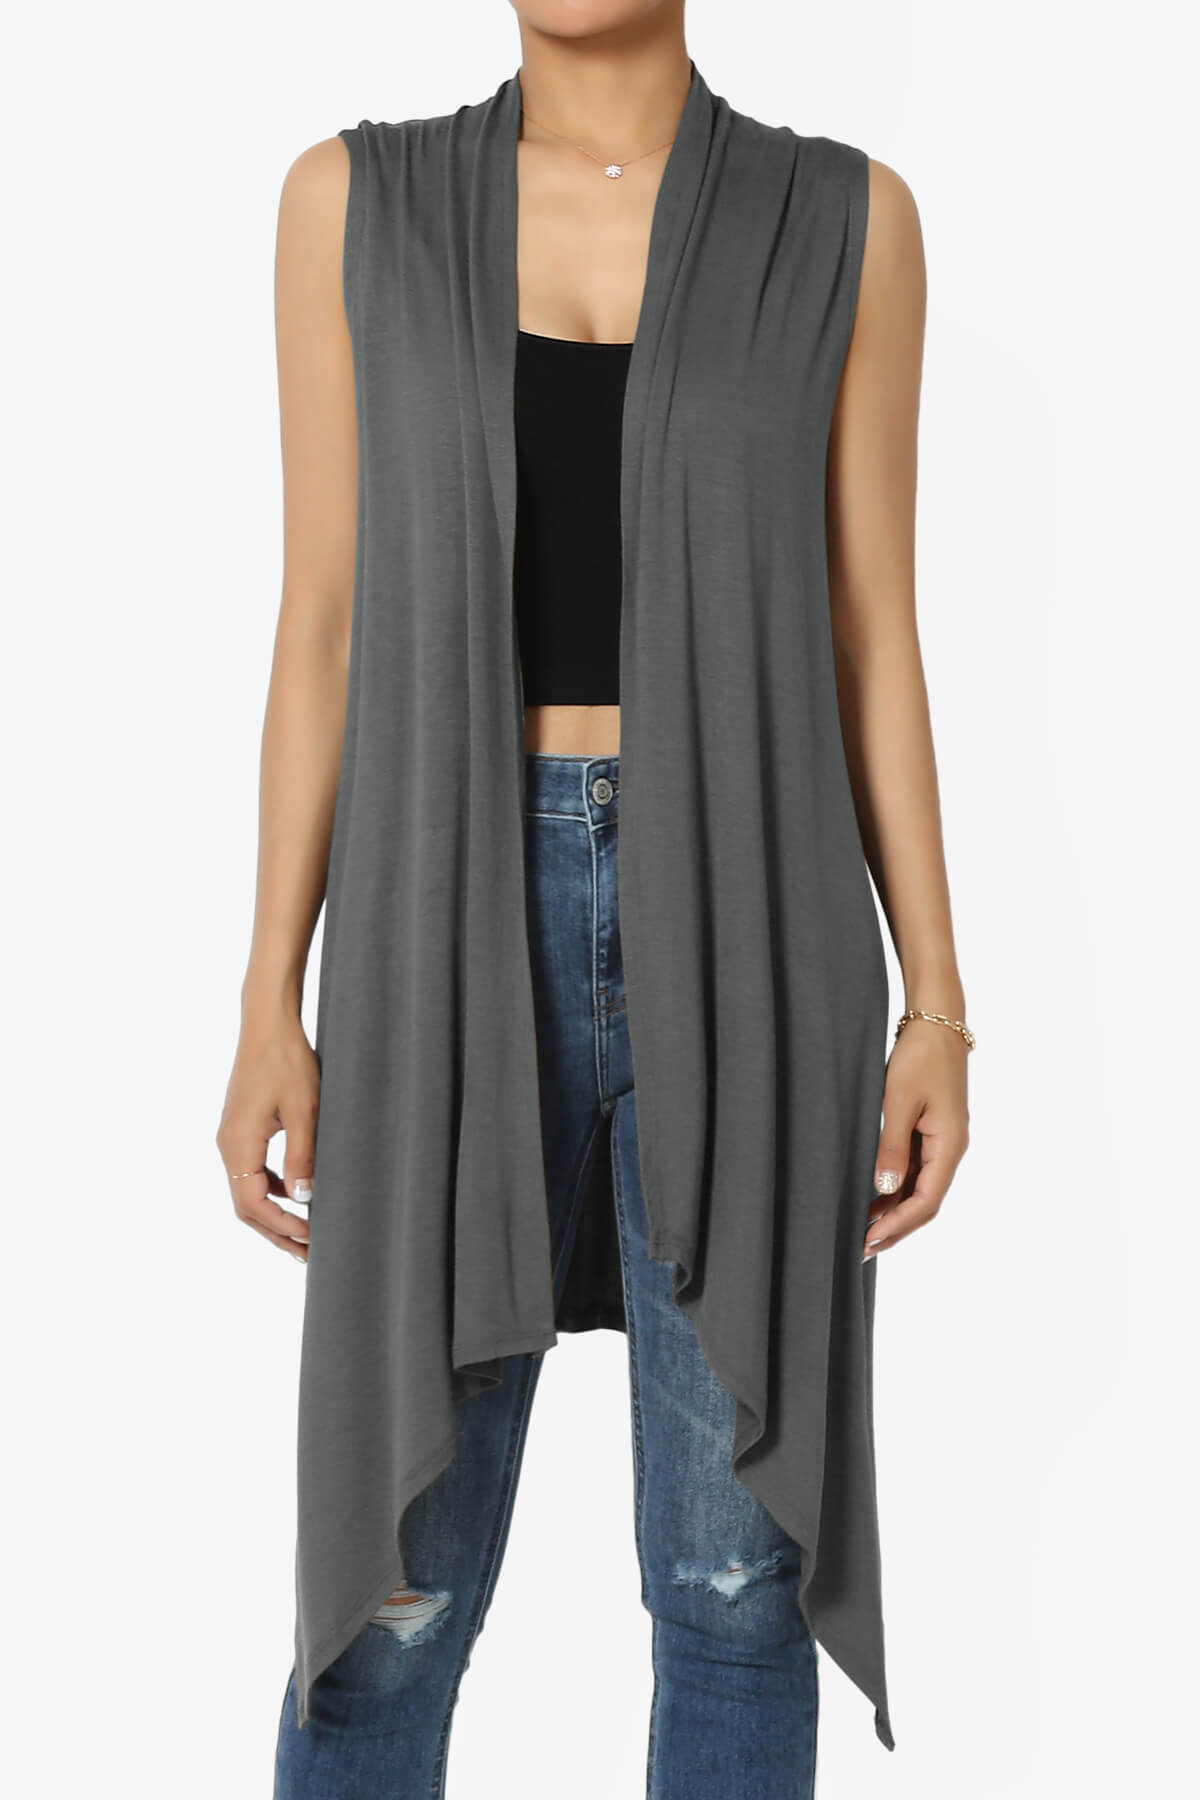 Load image into Gallery viewer, Taysom Draped Open Front Sleeveless Cardigan Vest ASH GREY_1
